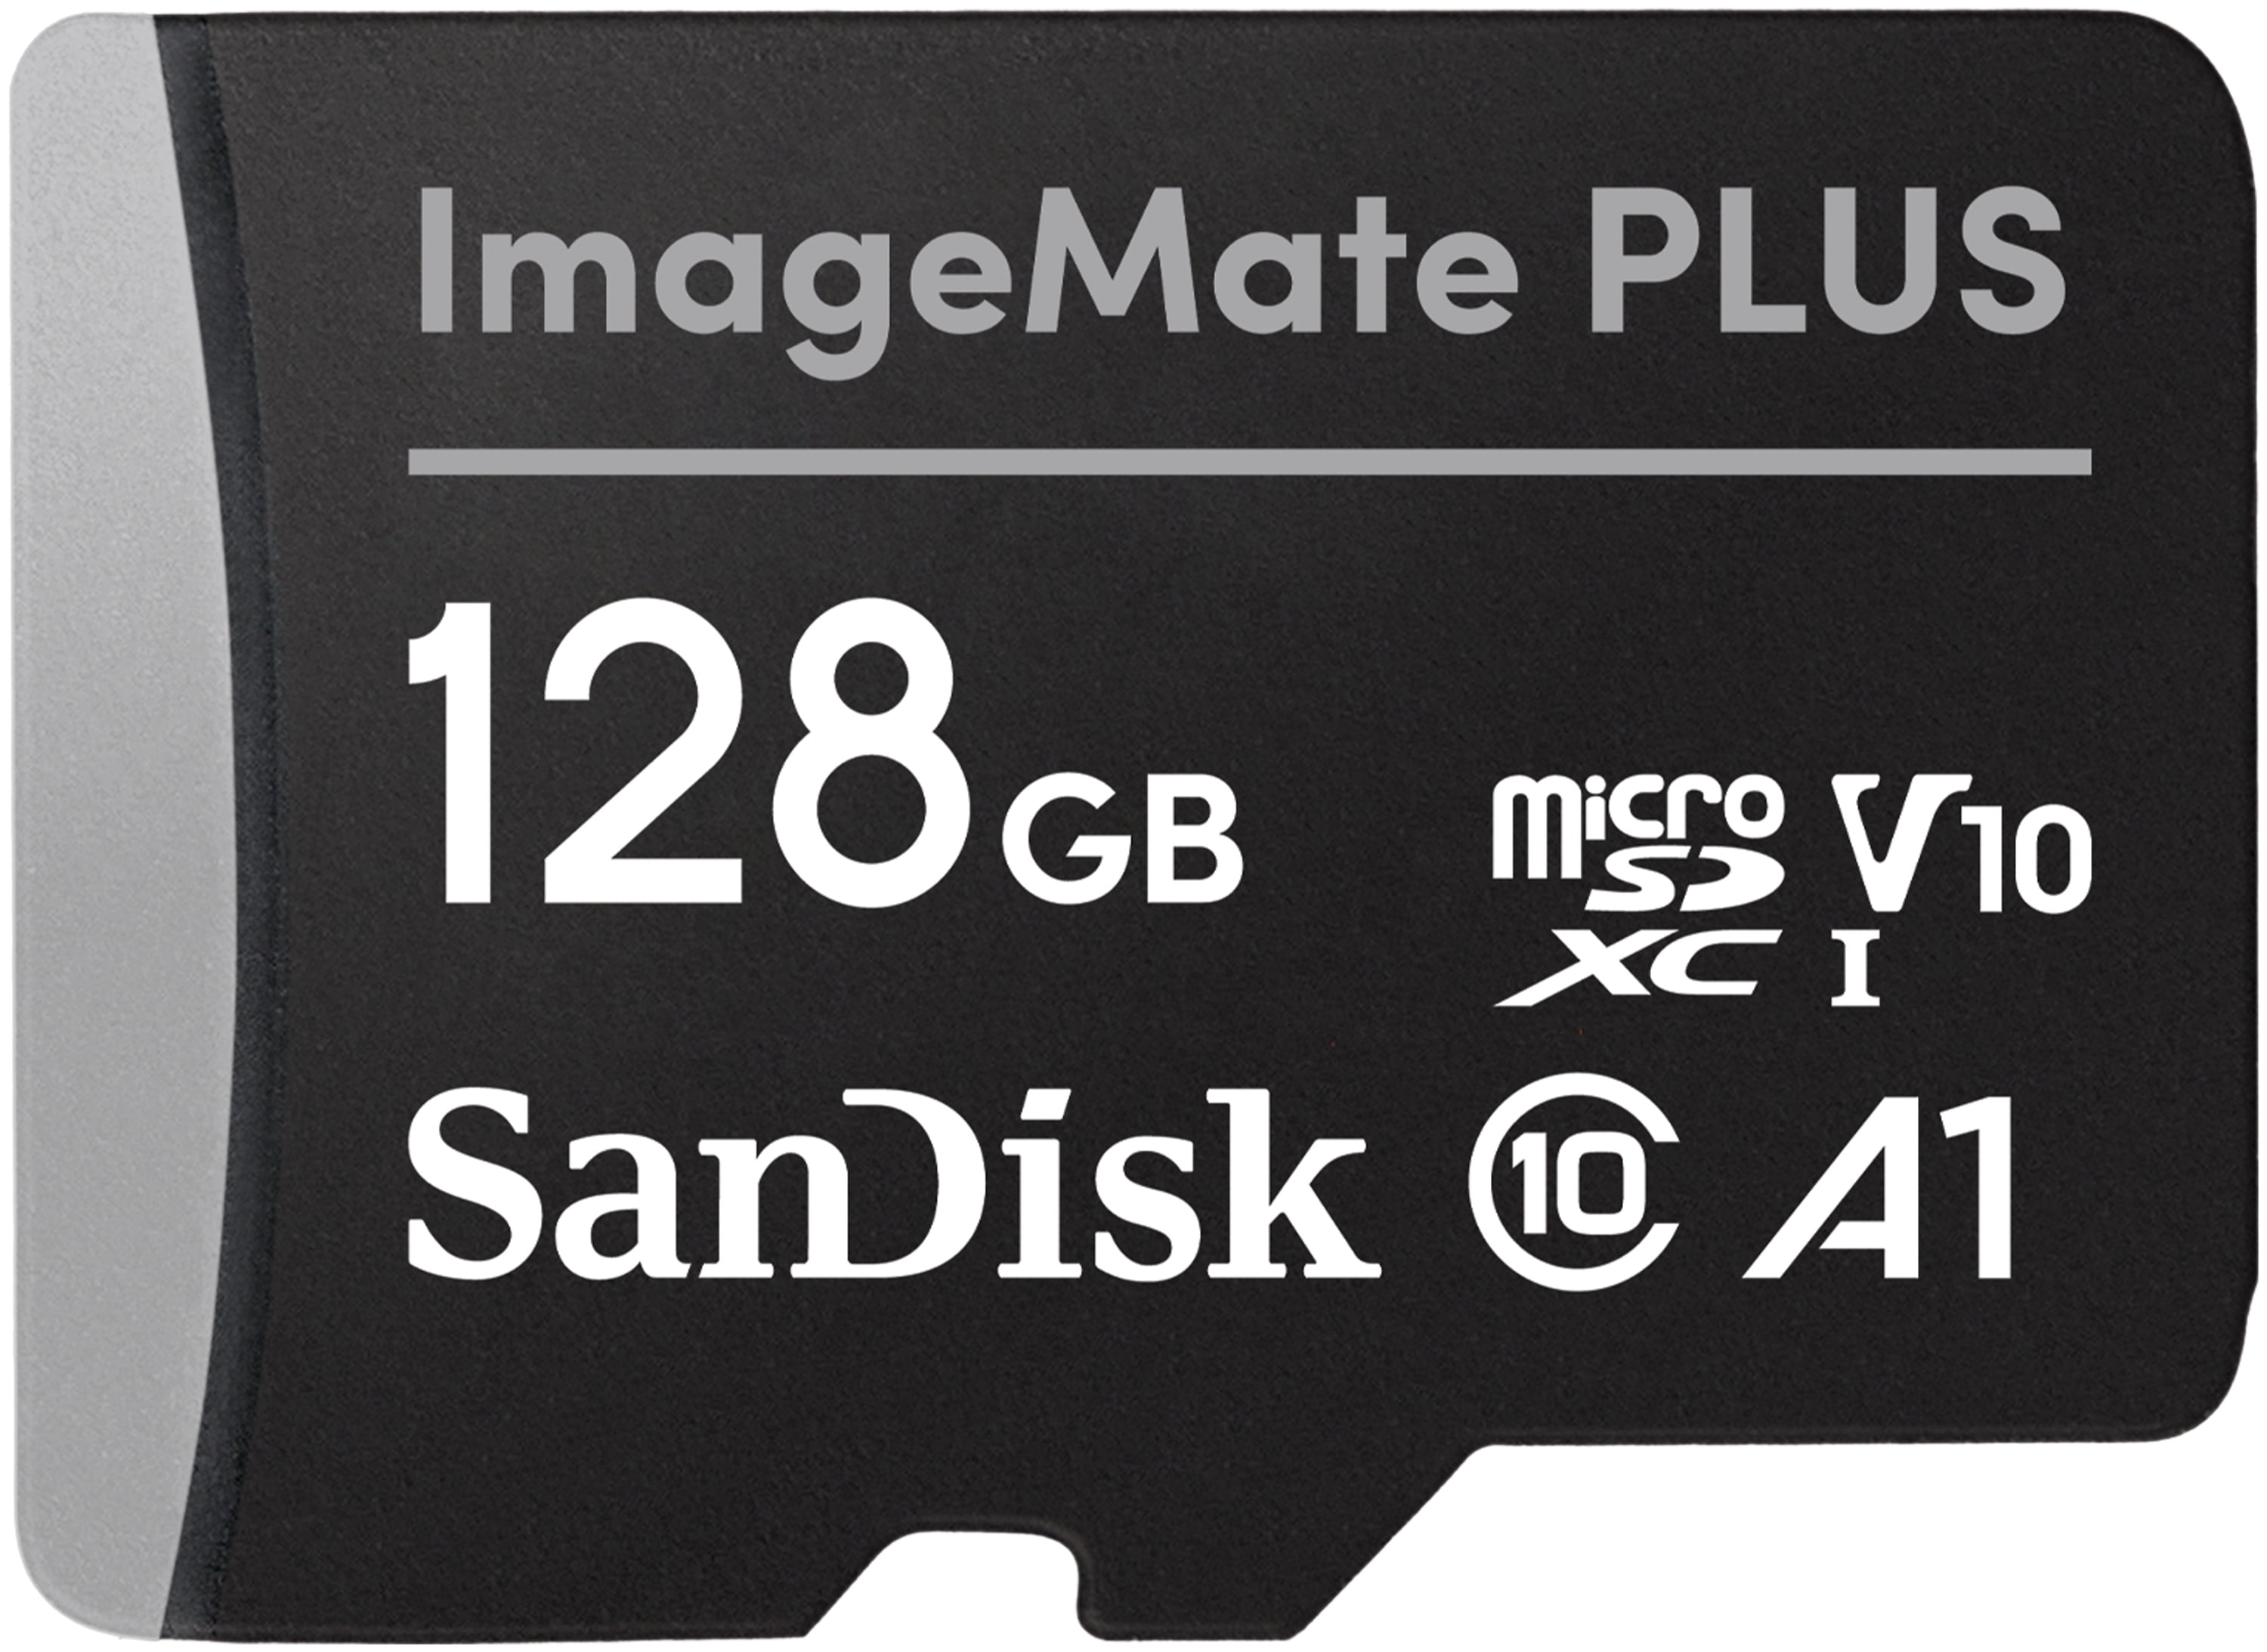 SanDisk 256GB Extreme Pro microSDXC UHS-I Memory Card SDSQXCD-256G-GN6MA 